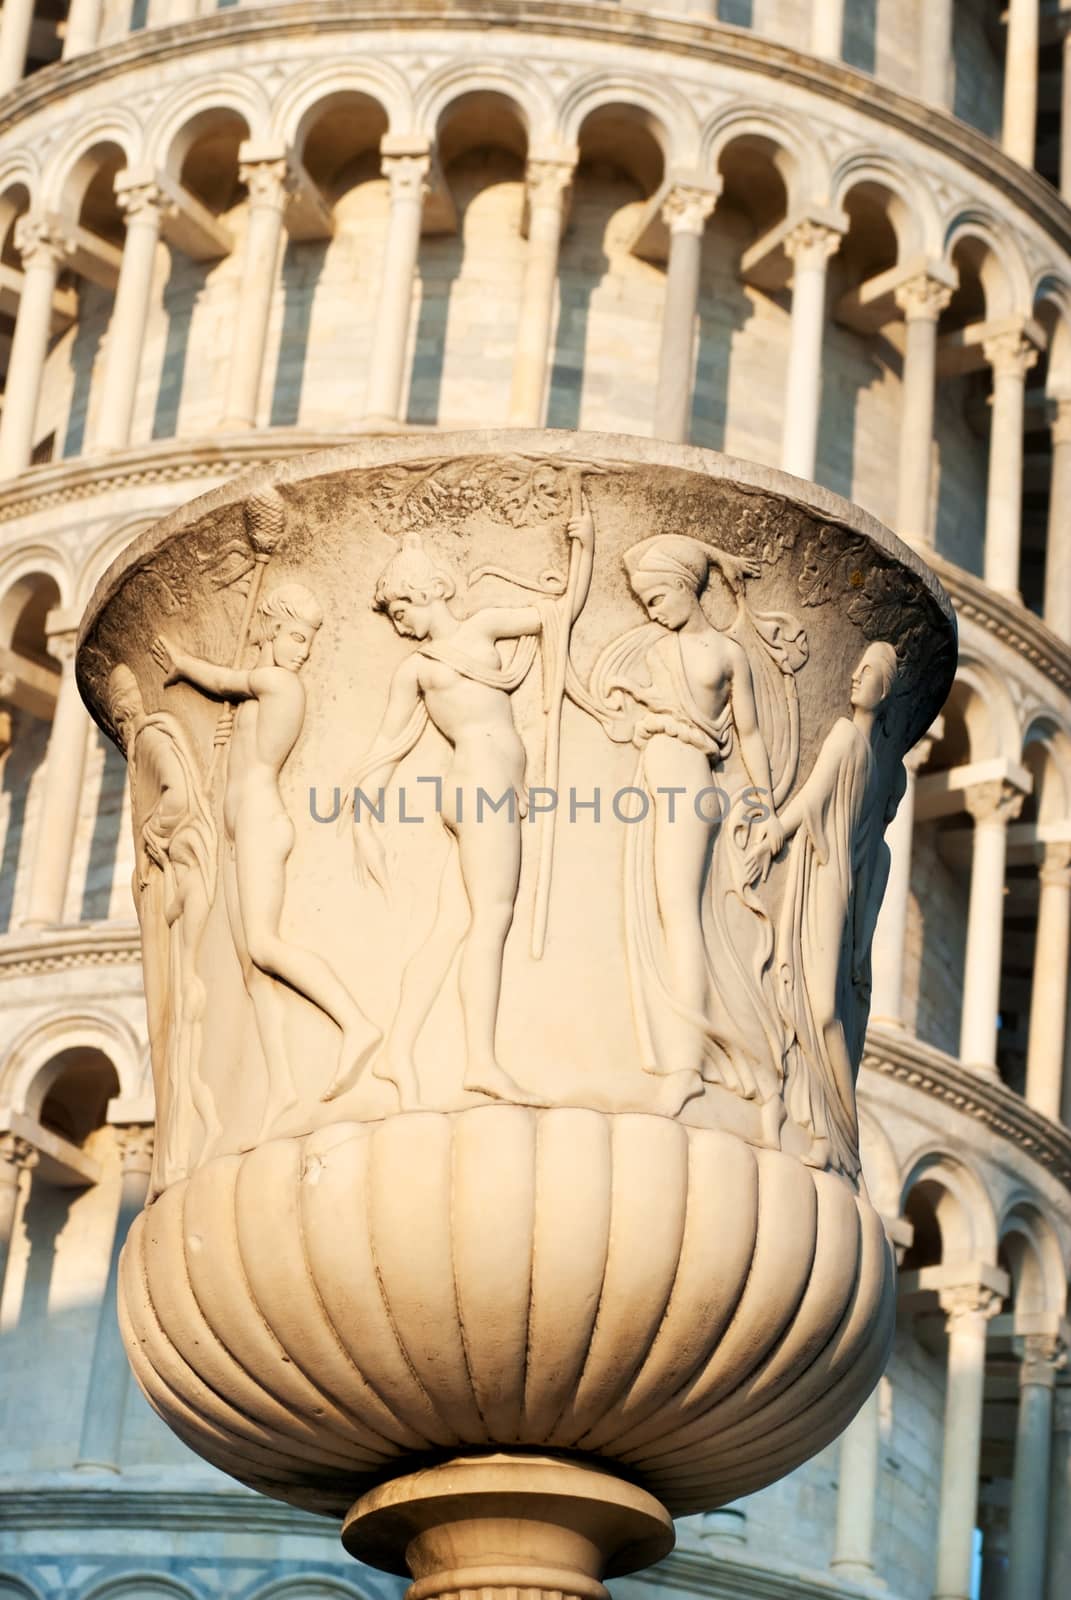 Leaning Tower of Pisa, detail